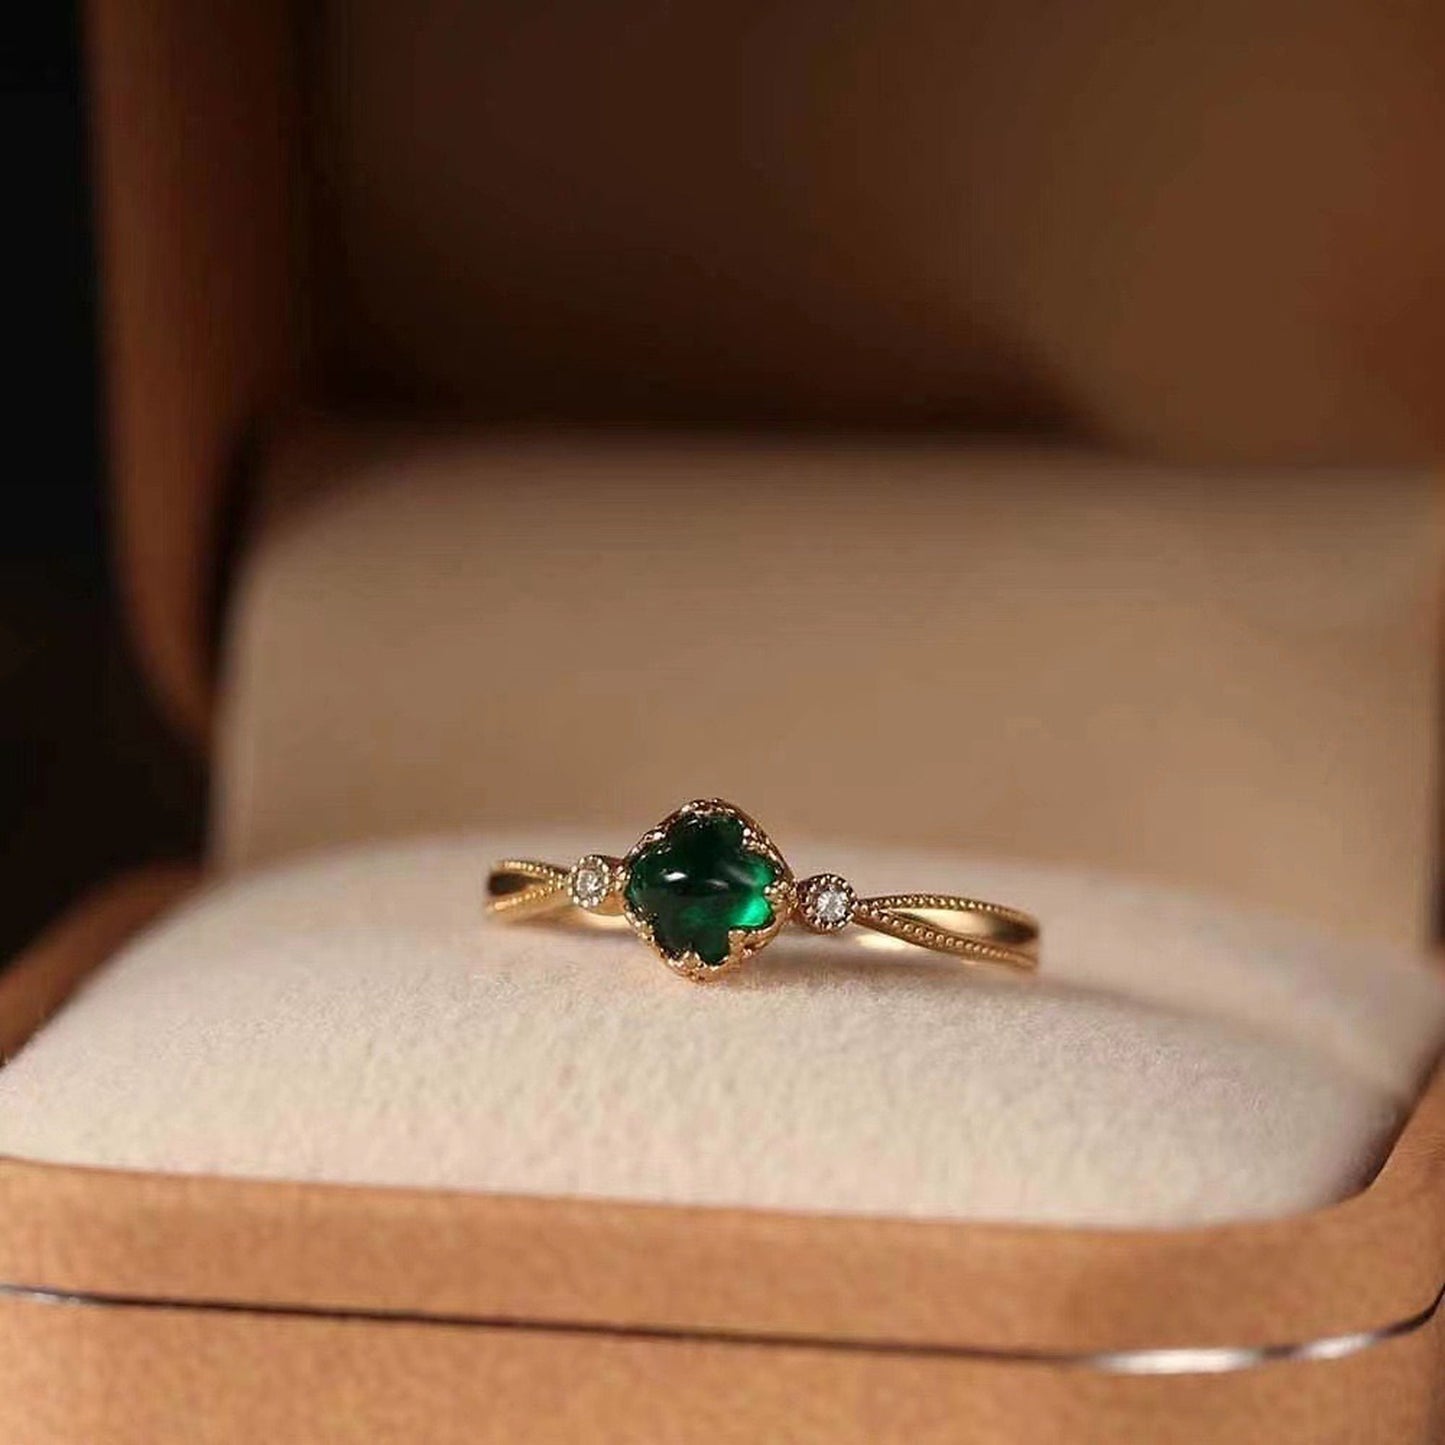 Handmade emerald gold ring, Green emerald lace ring, Multi-stone minimalist ring, Round emerald ring, Vintage emerald cz ring, Delicate Gift